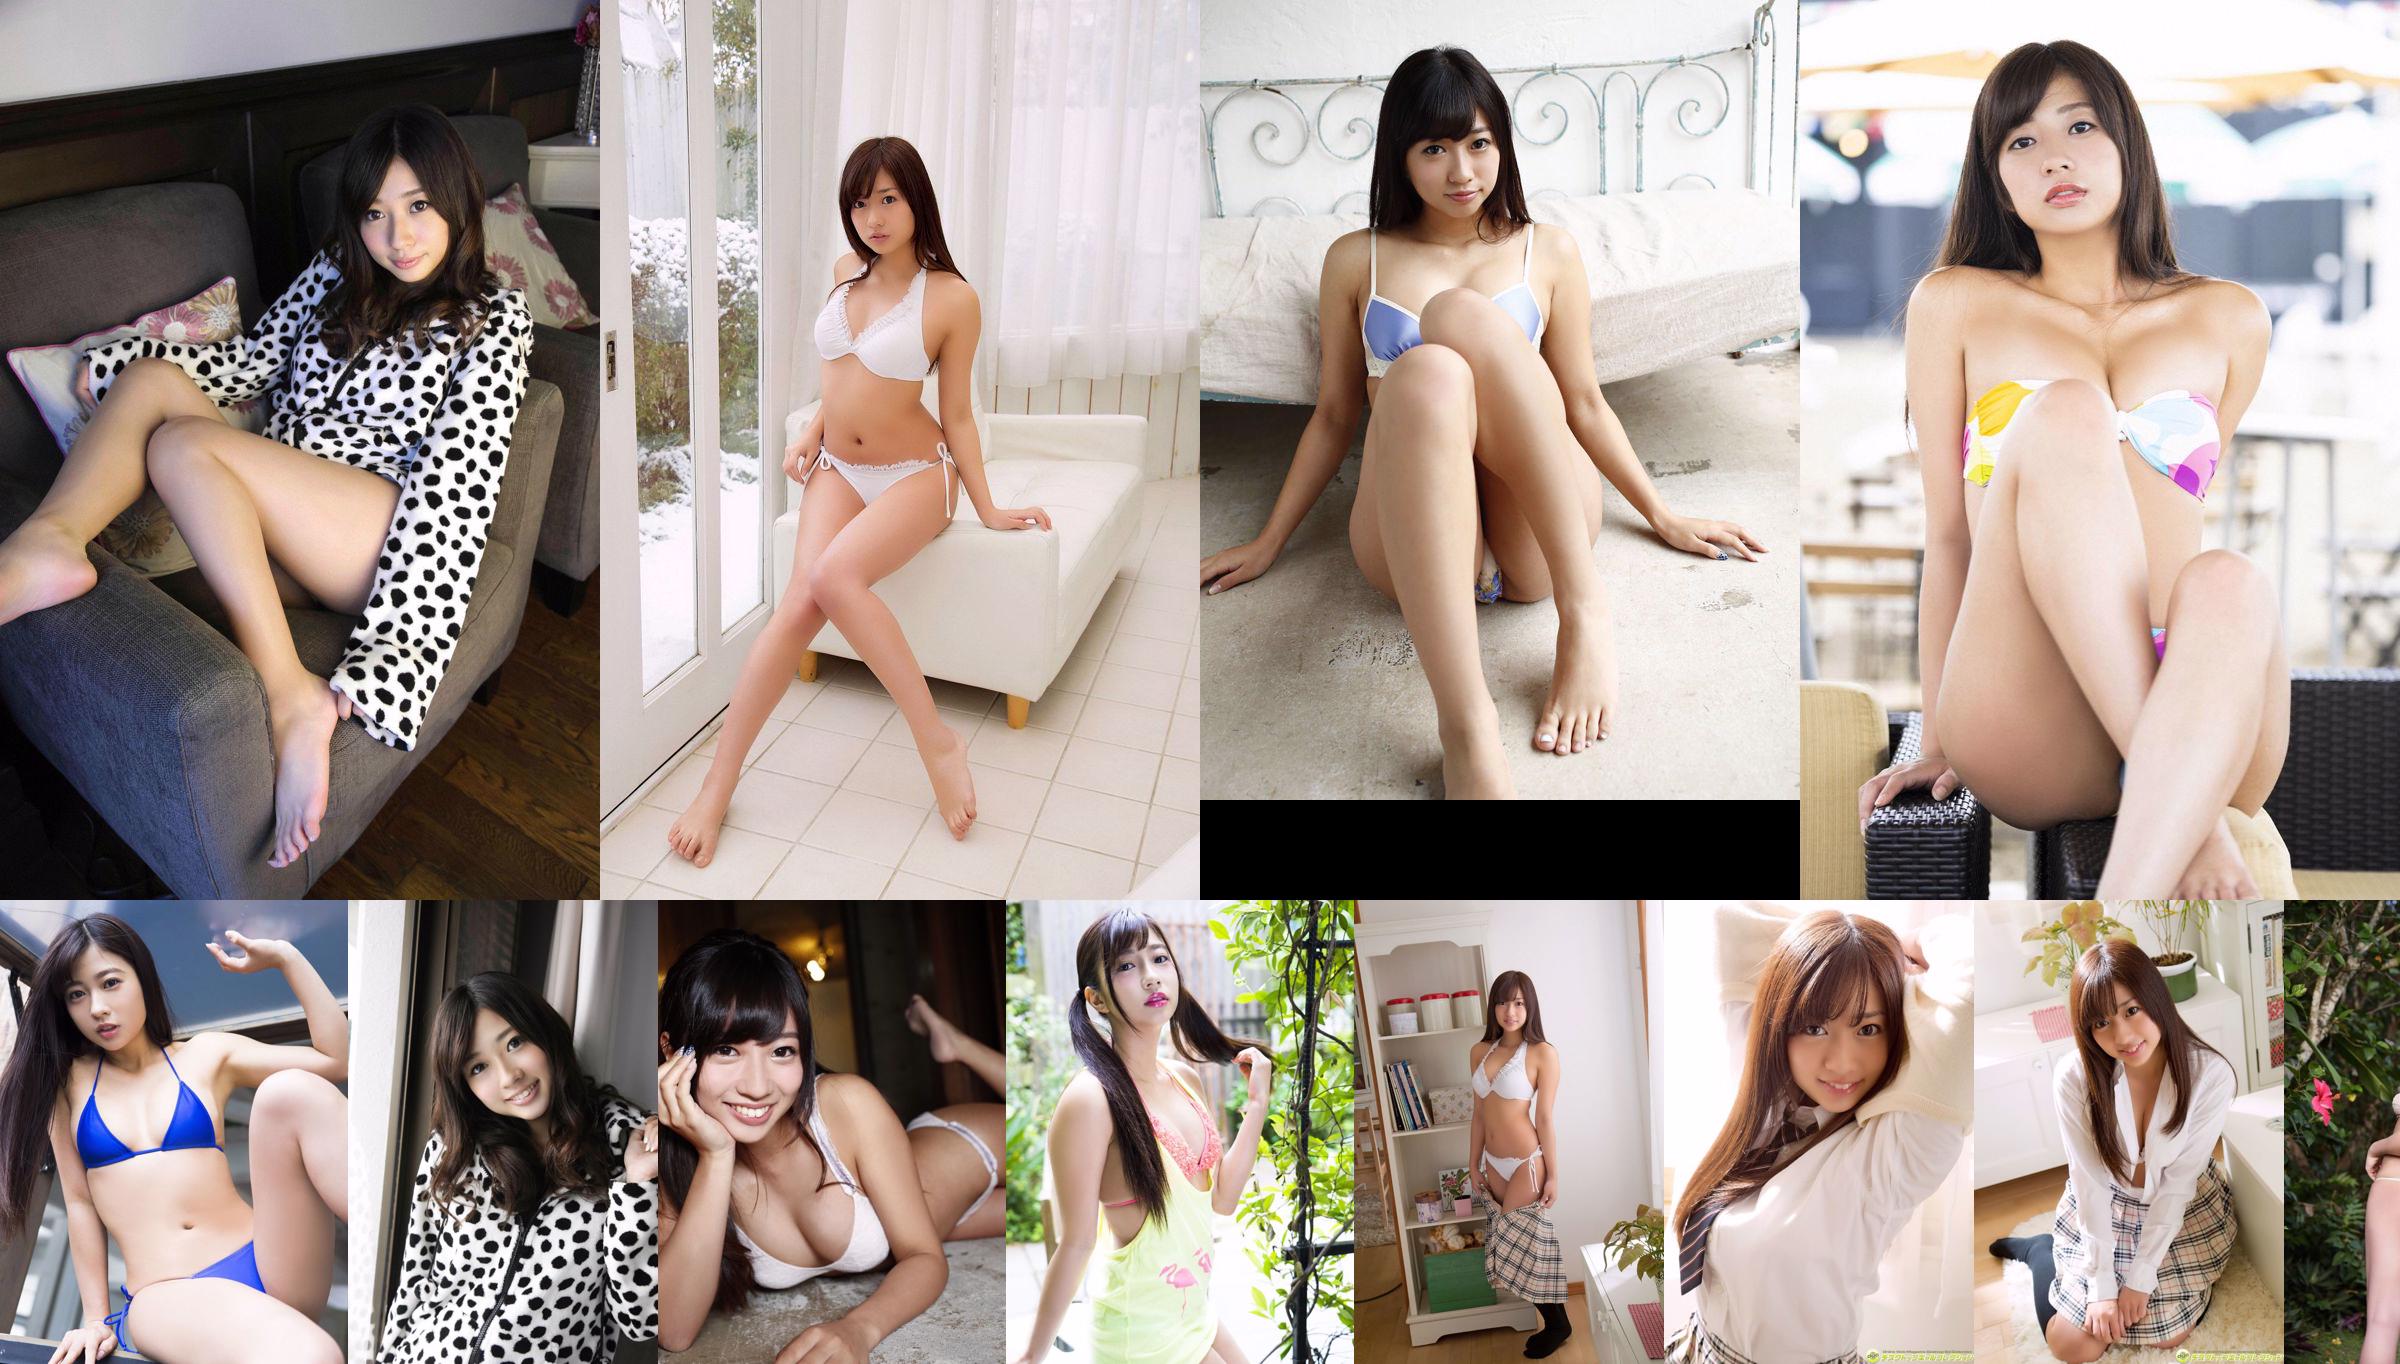 Daikan Ayaka "Appropriate Material and Milk" [Sabra.net] Strictly Girl No.db7f90 Page 1